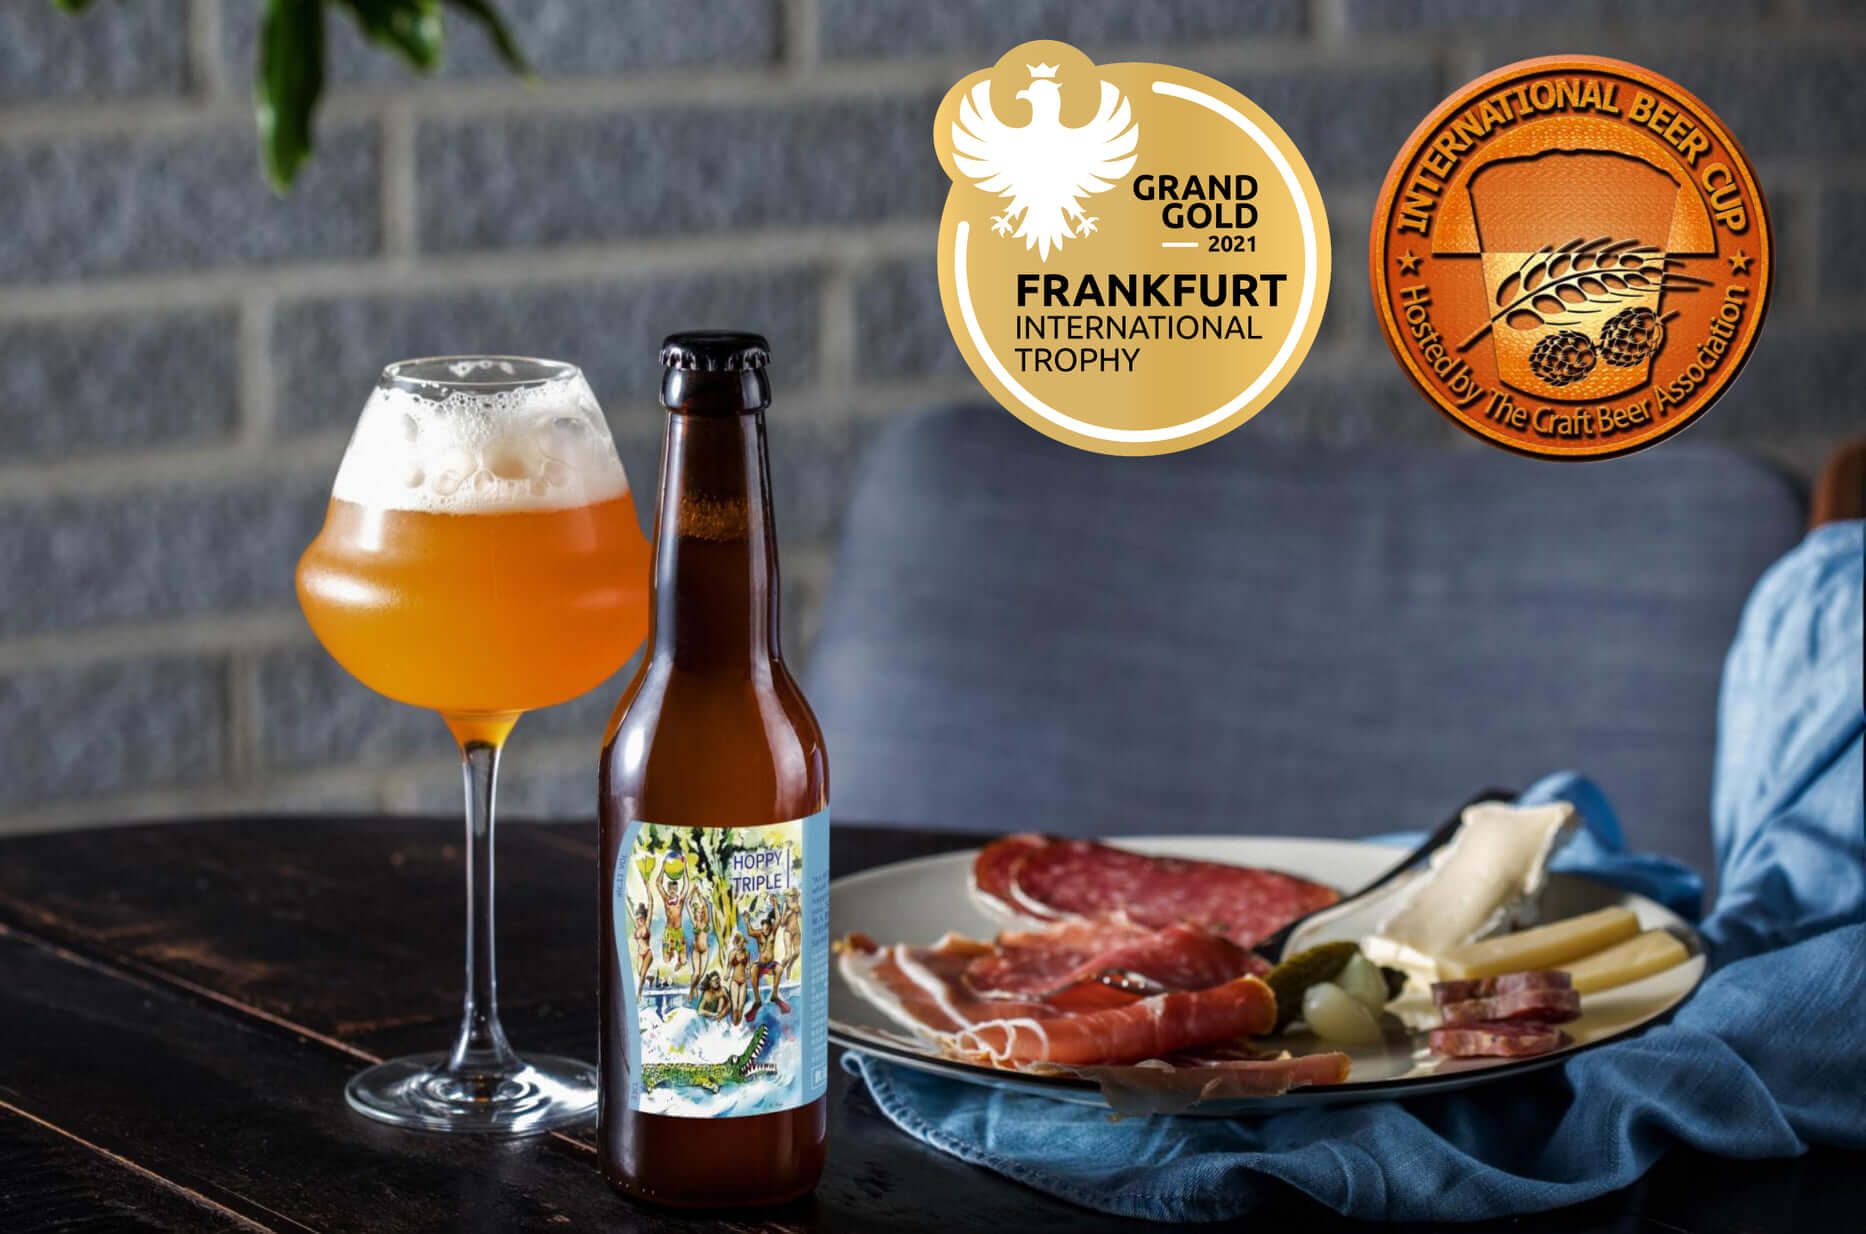 Our Hoppy Triple won the Grand Gold medal at the Frankfurt International Trophy 2021